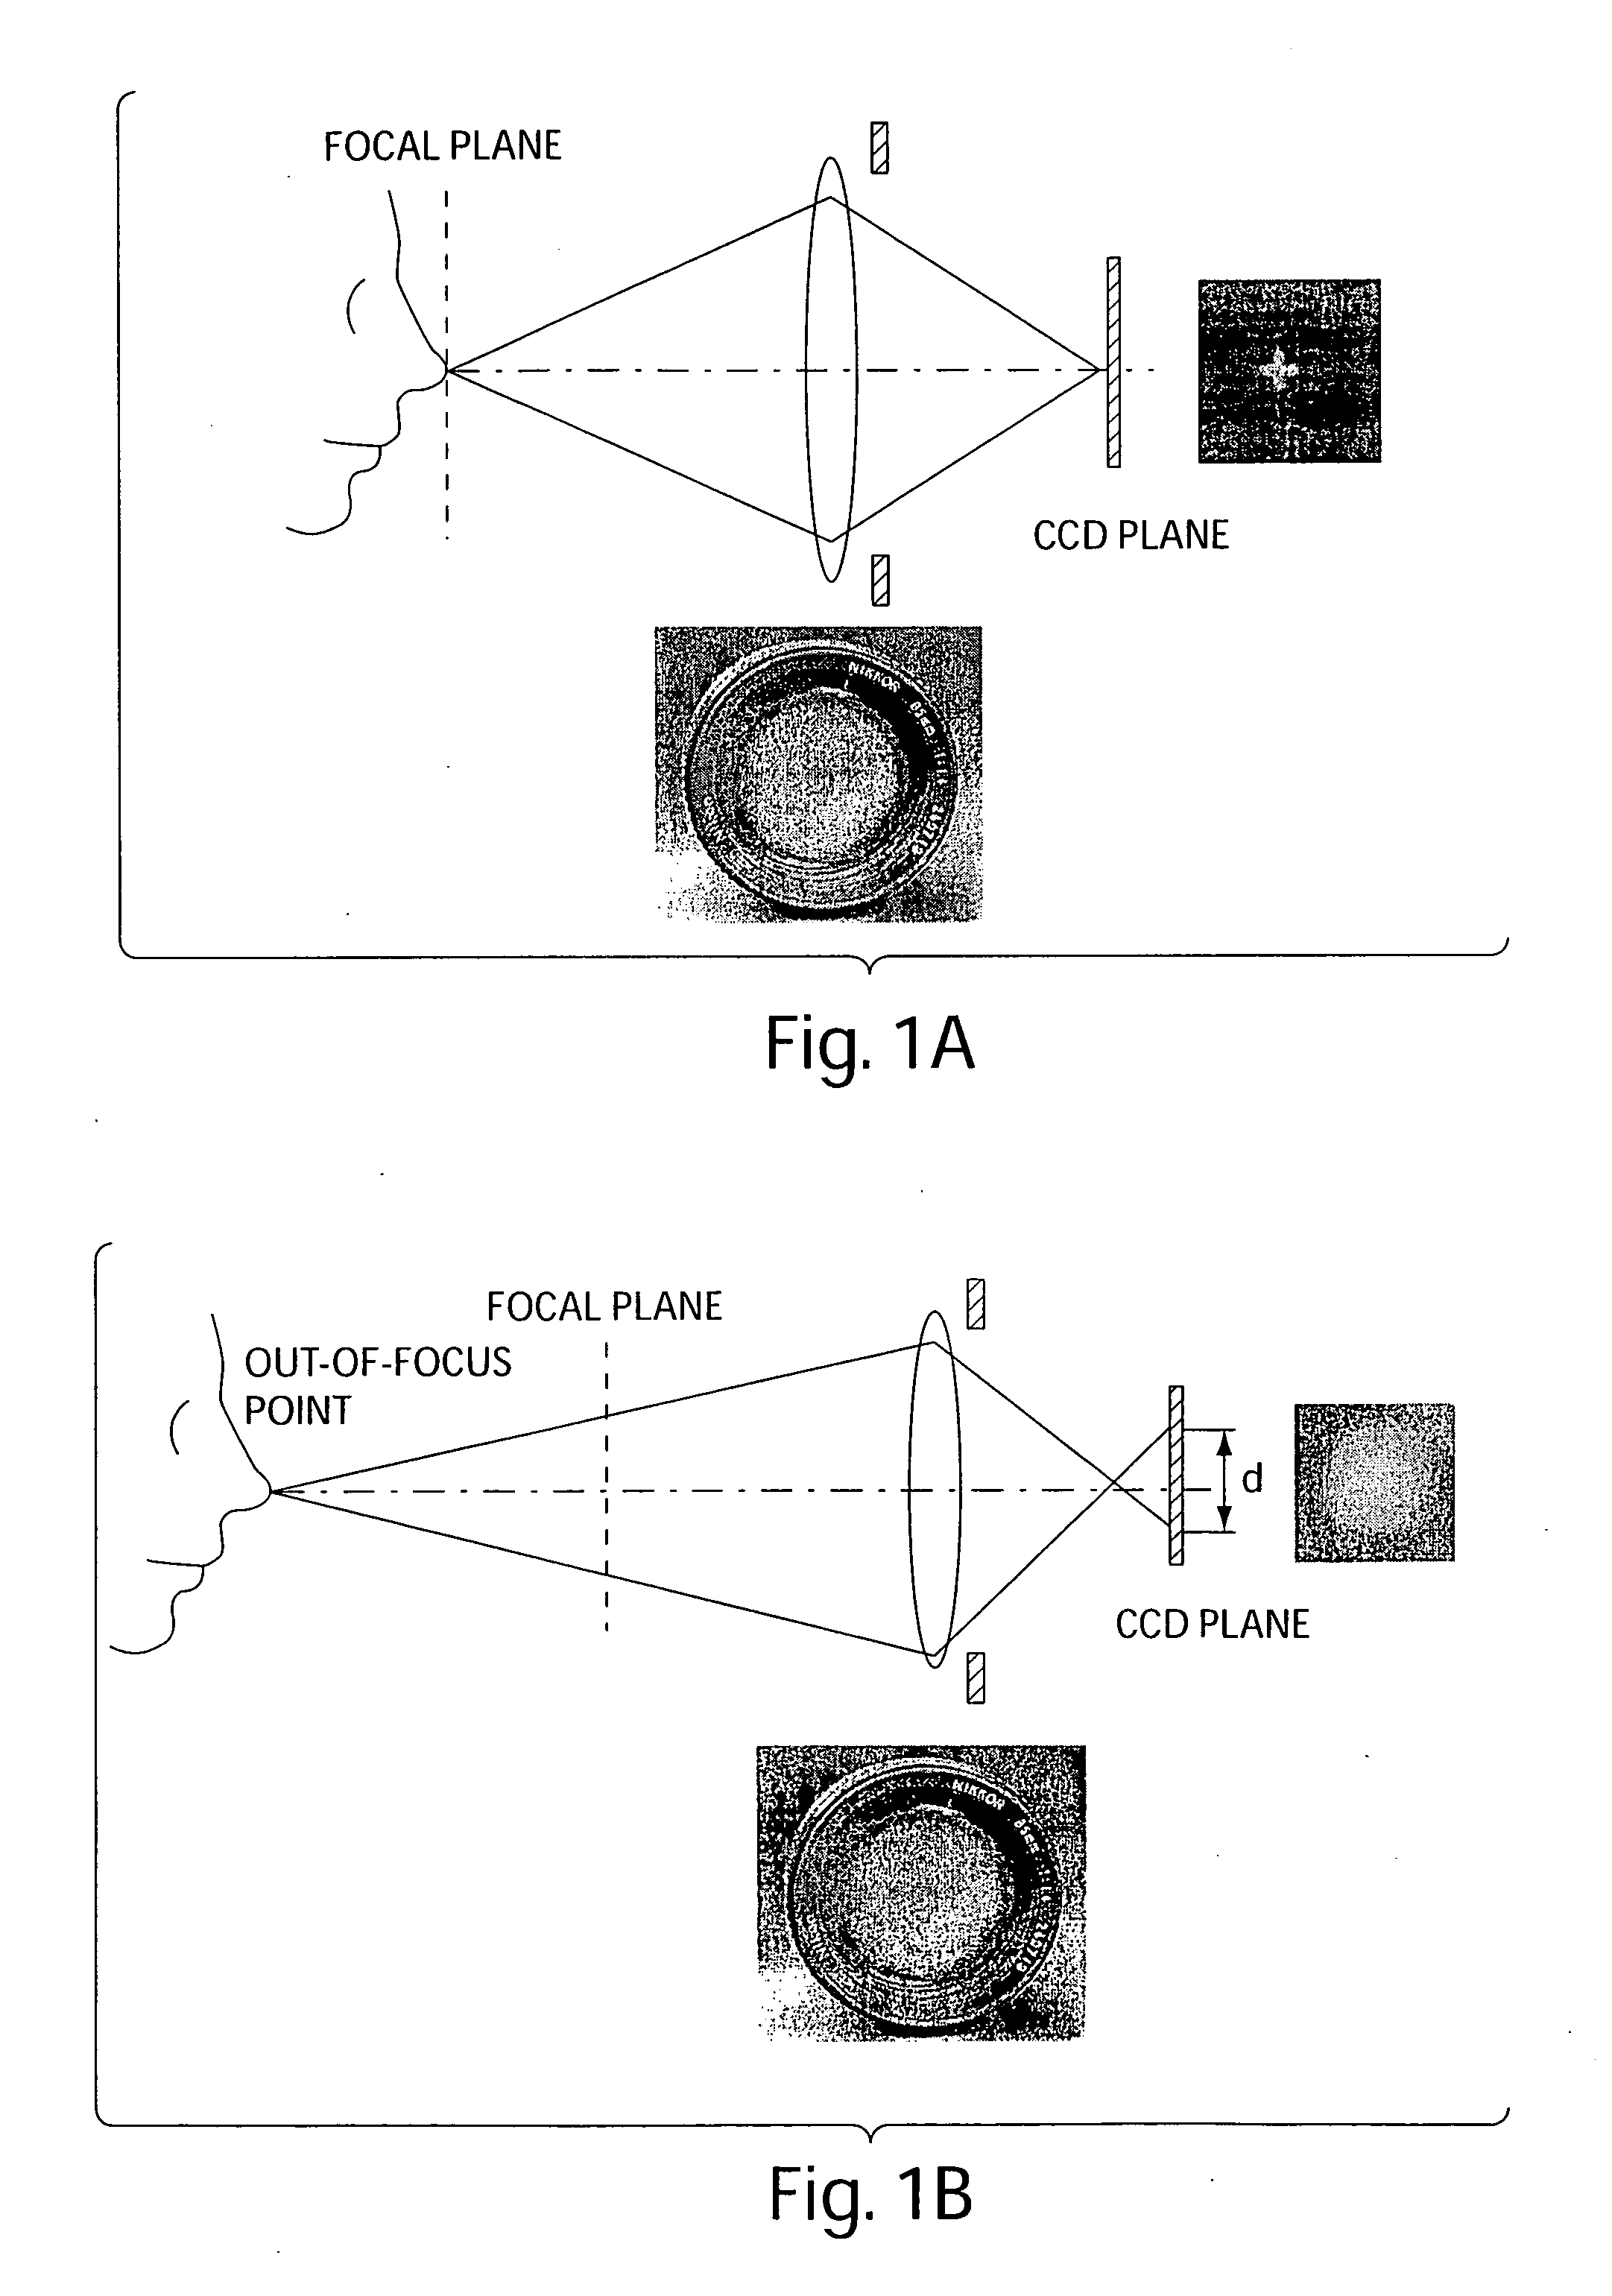 Methods and apparatus for 3D surface imaging using active wave-front sampling